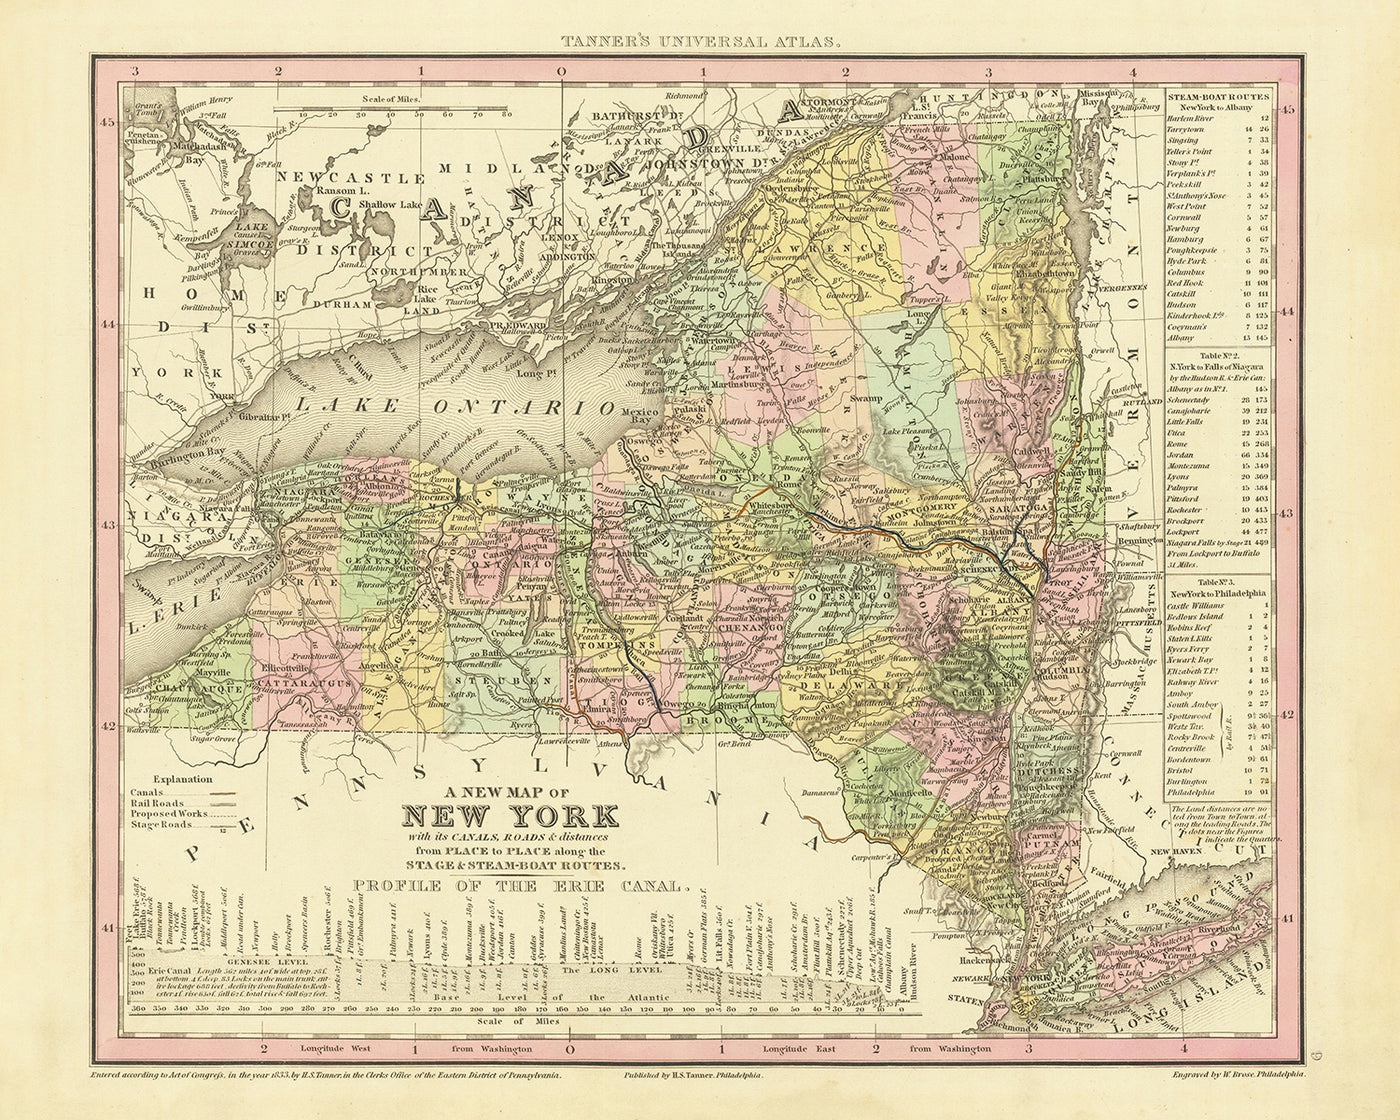 Old Map of New York State by H. S. Tanner, 1836: New York City, Buffalo, Rochester, Yonkers, Syracuse, Roads, Railway, Canals